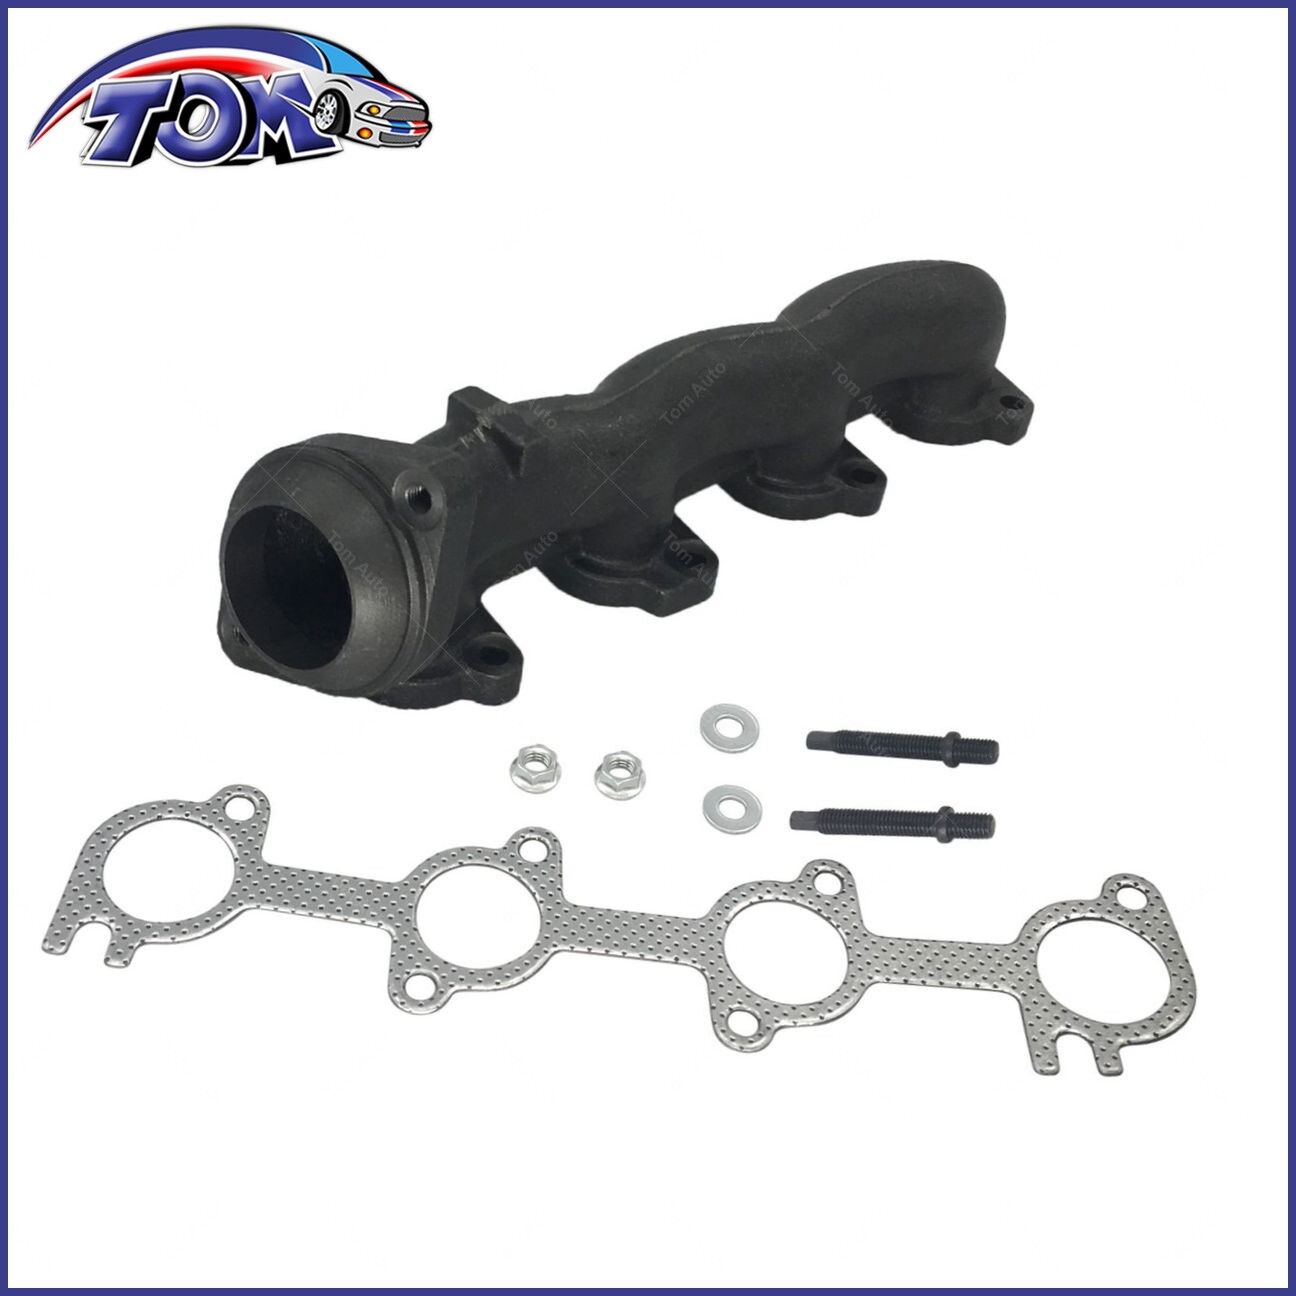 Exhaust Manifold Passenger Right For Expedition F150 F250 Pickup Truck 4.6L